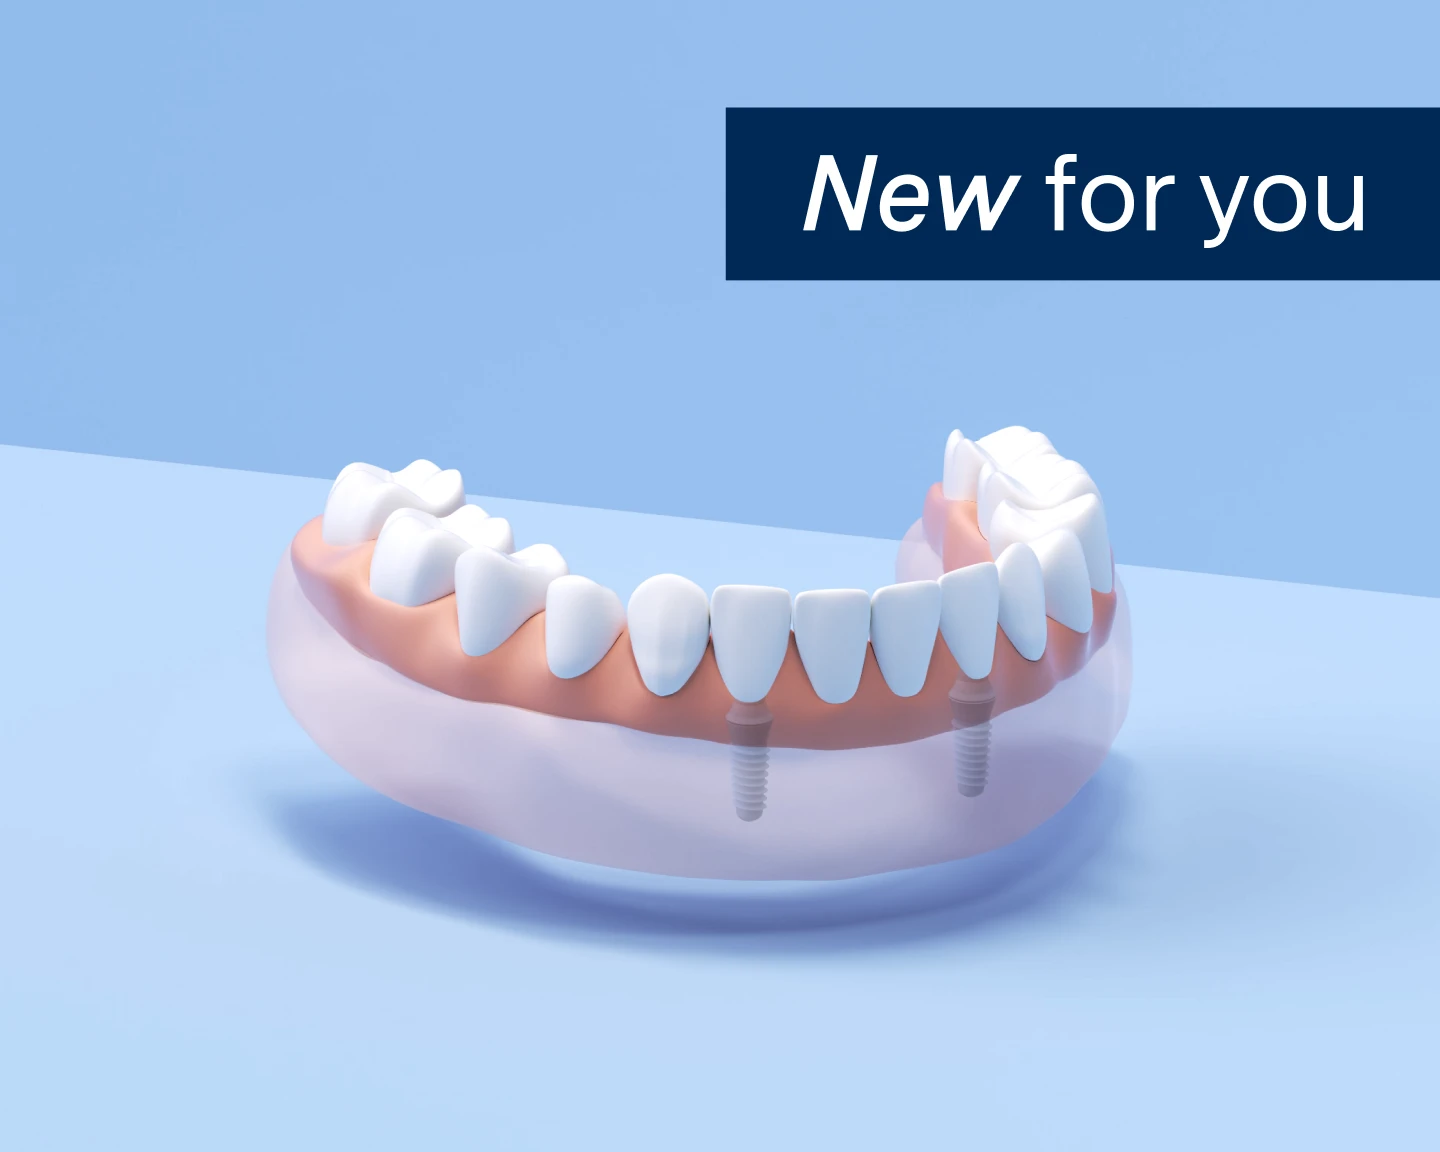 An illustration of implant dentures on a blue background with the words 'new for you'.